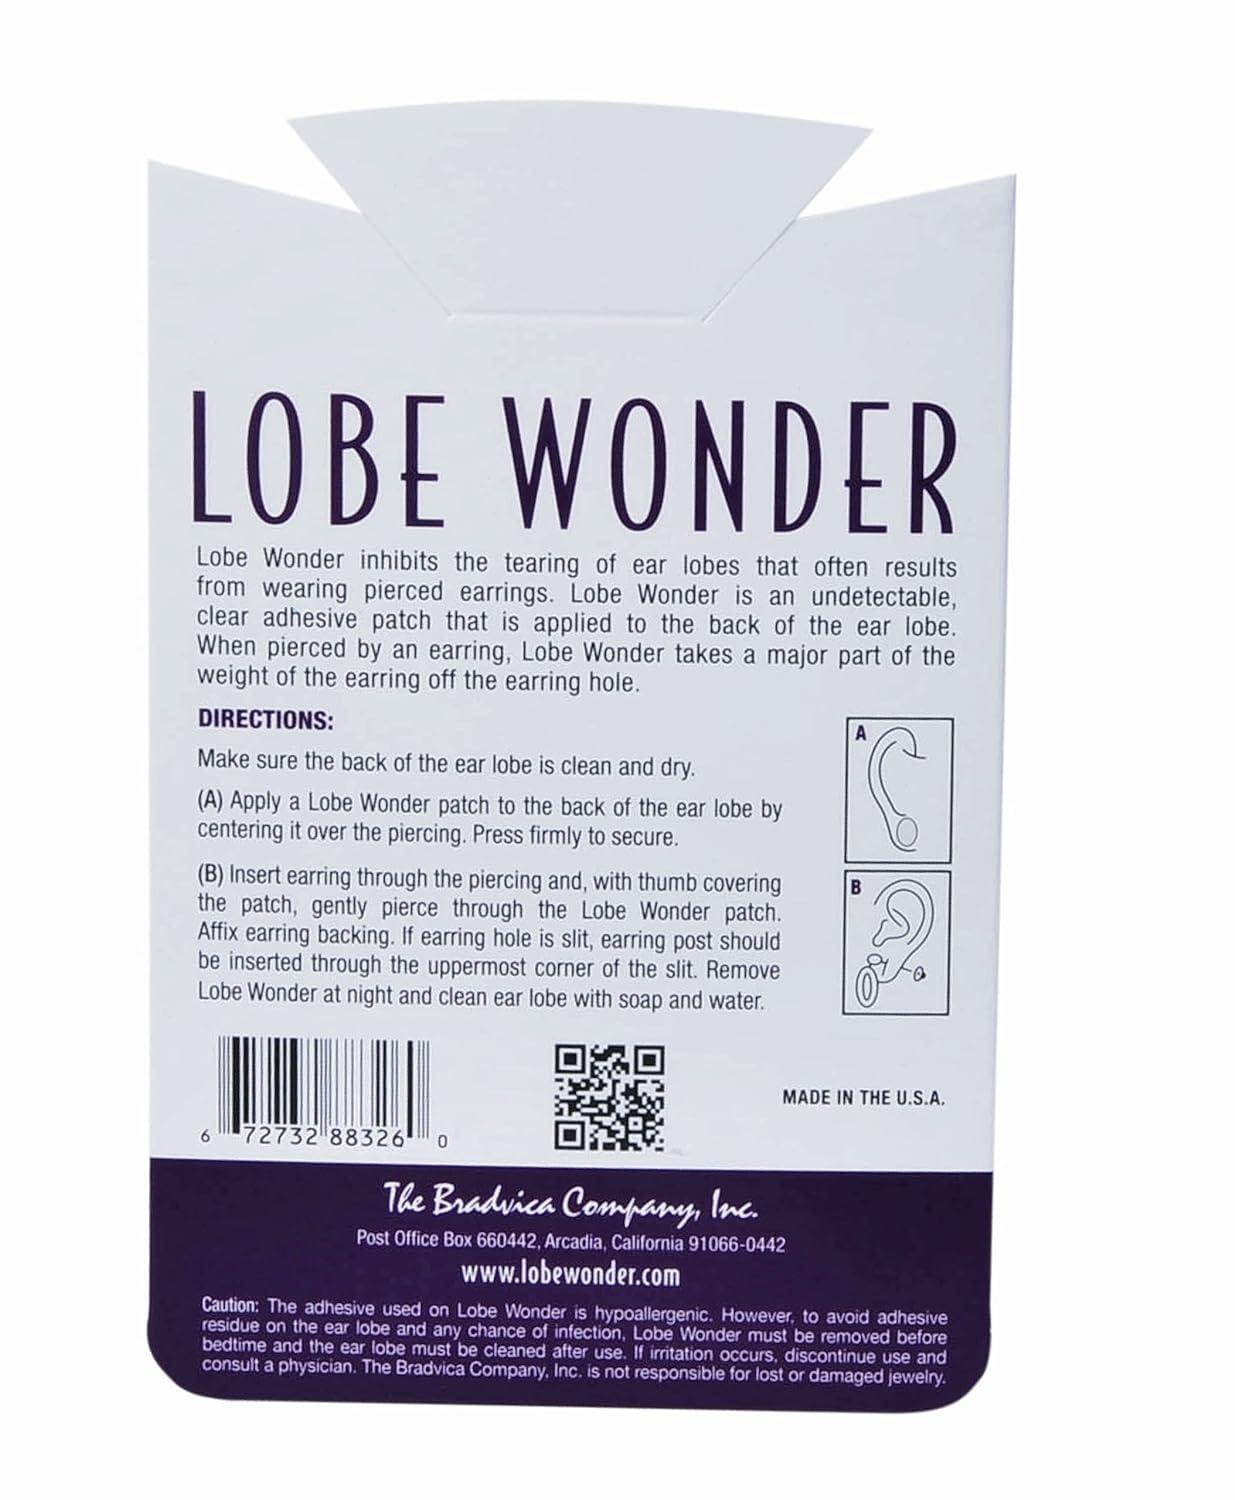 Lobe Miracle Ear Lobe Support Patches, 60 Count